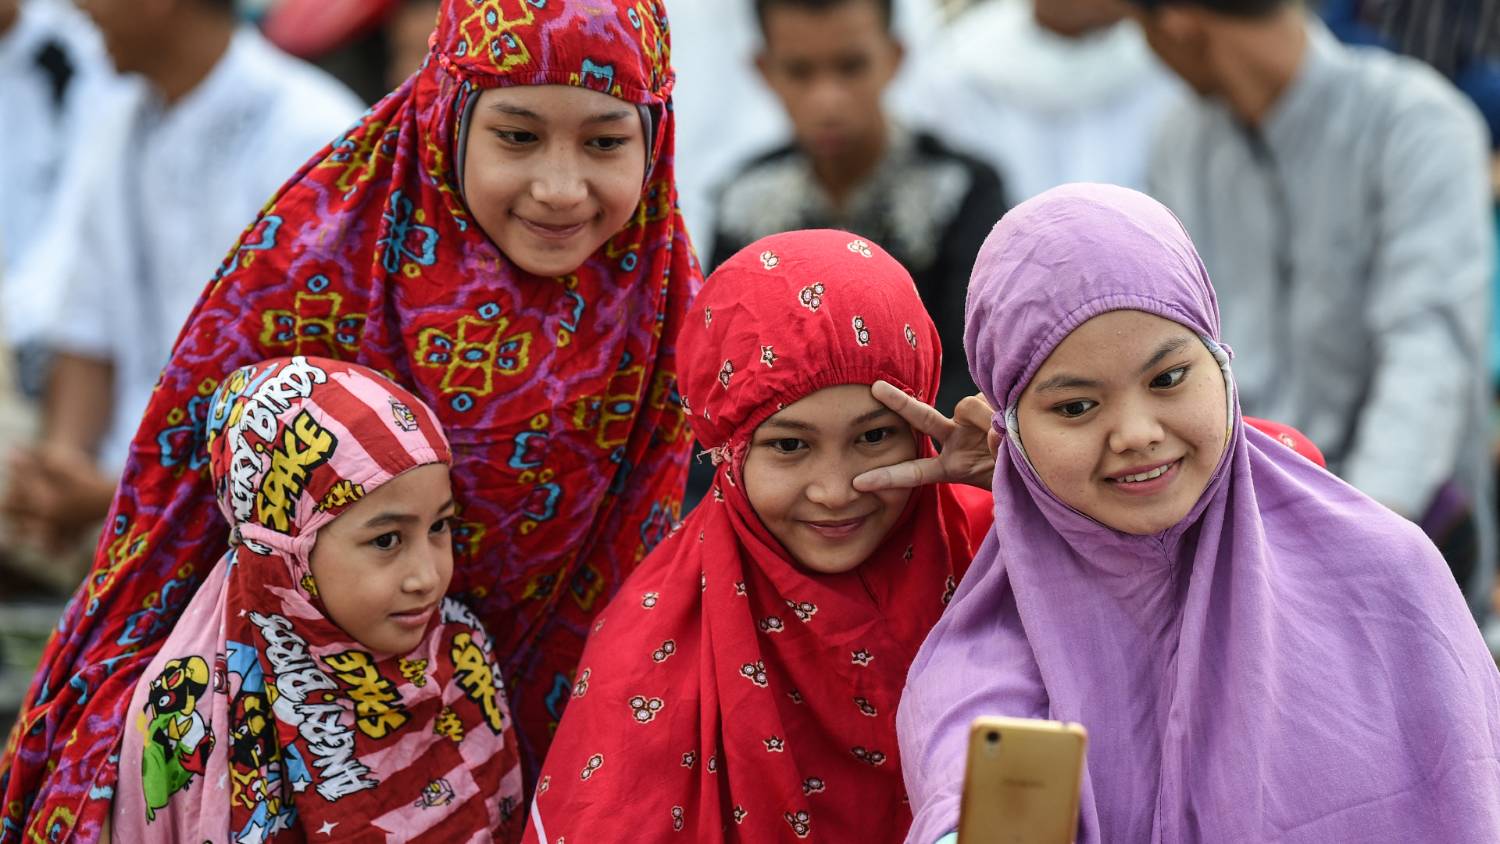 A group of young girls gather to enjoy Eid celebrations in Indonesia (Mohammed Rasfan AFP)